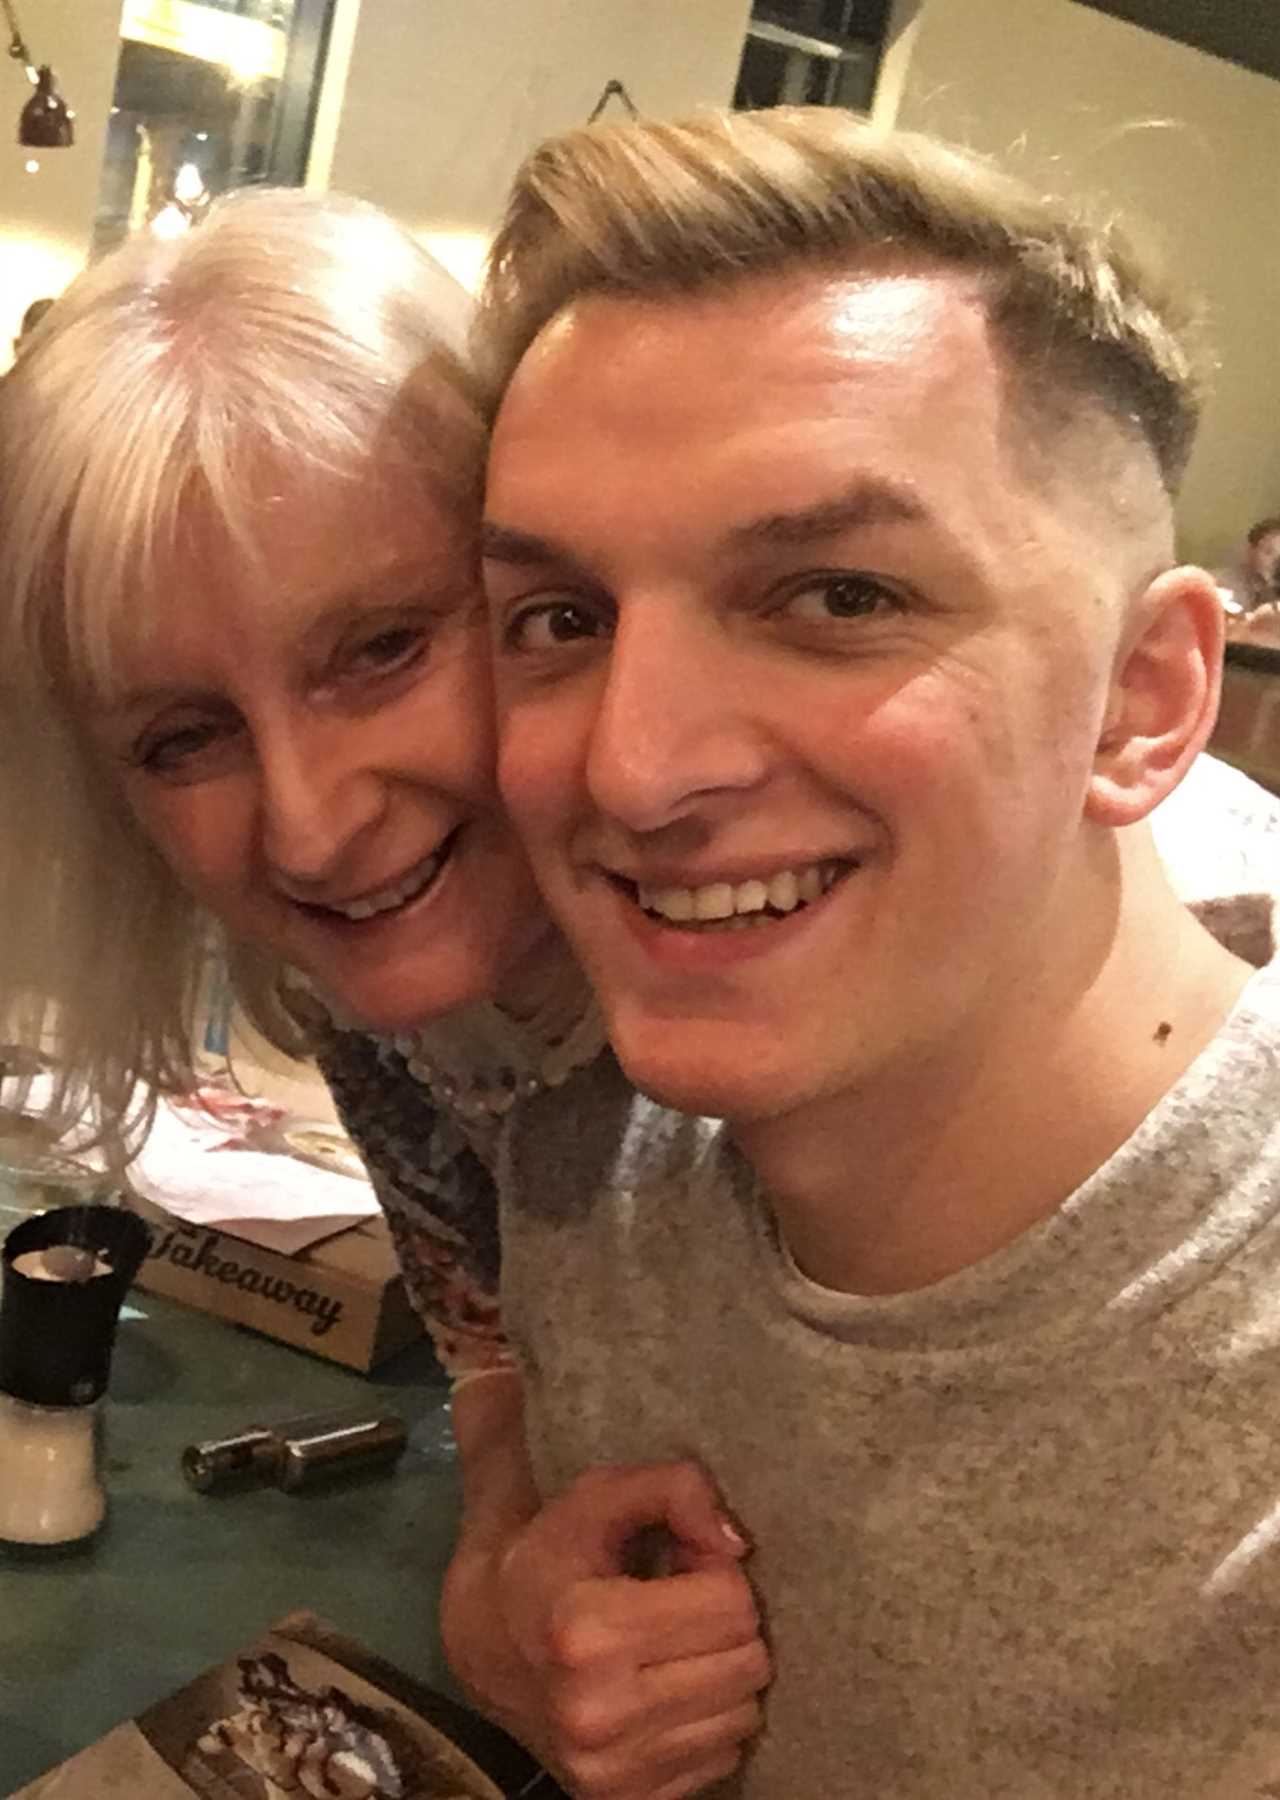 My son’s bravely decided to stop cancer treatment – he’s not afraid of dying but I’m terrified to live without him